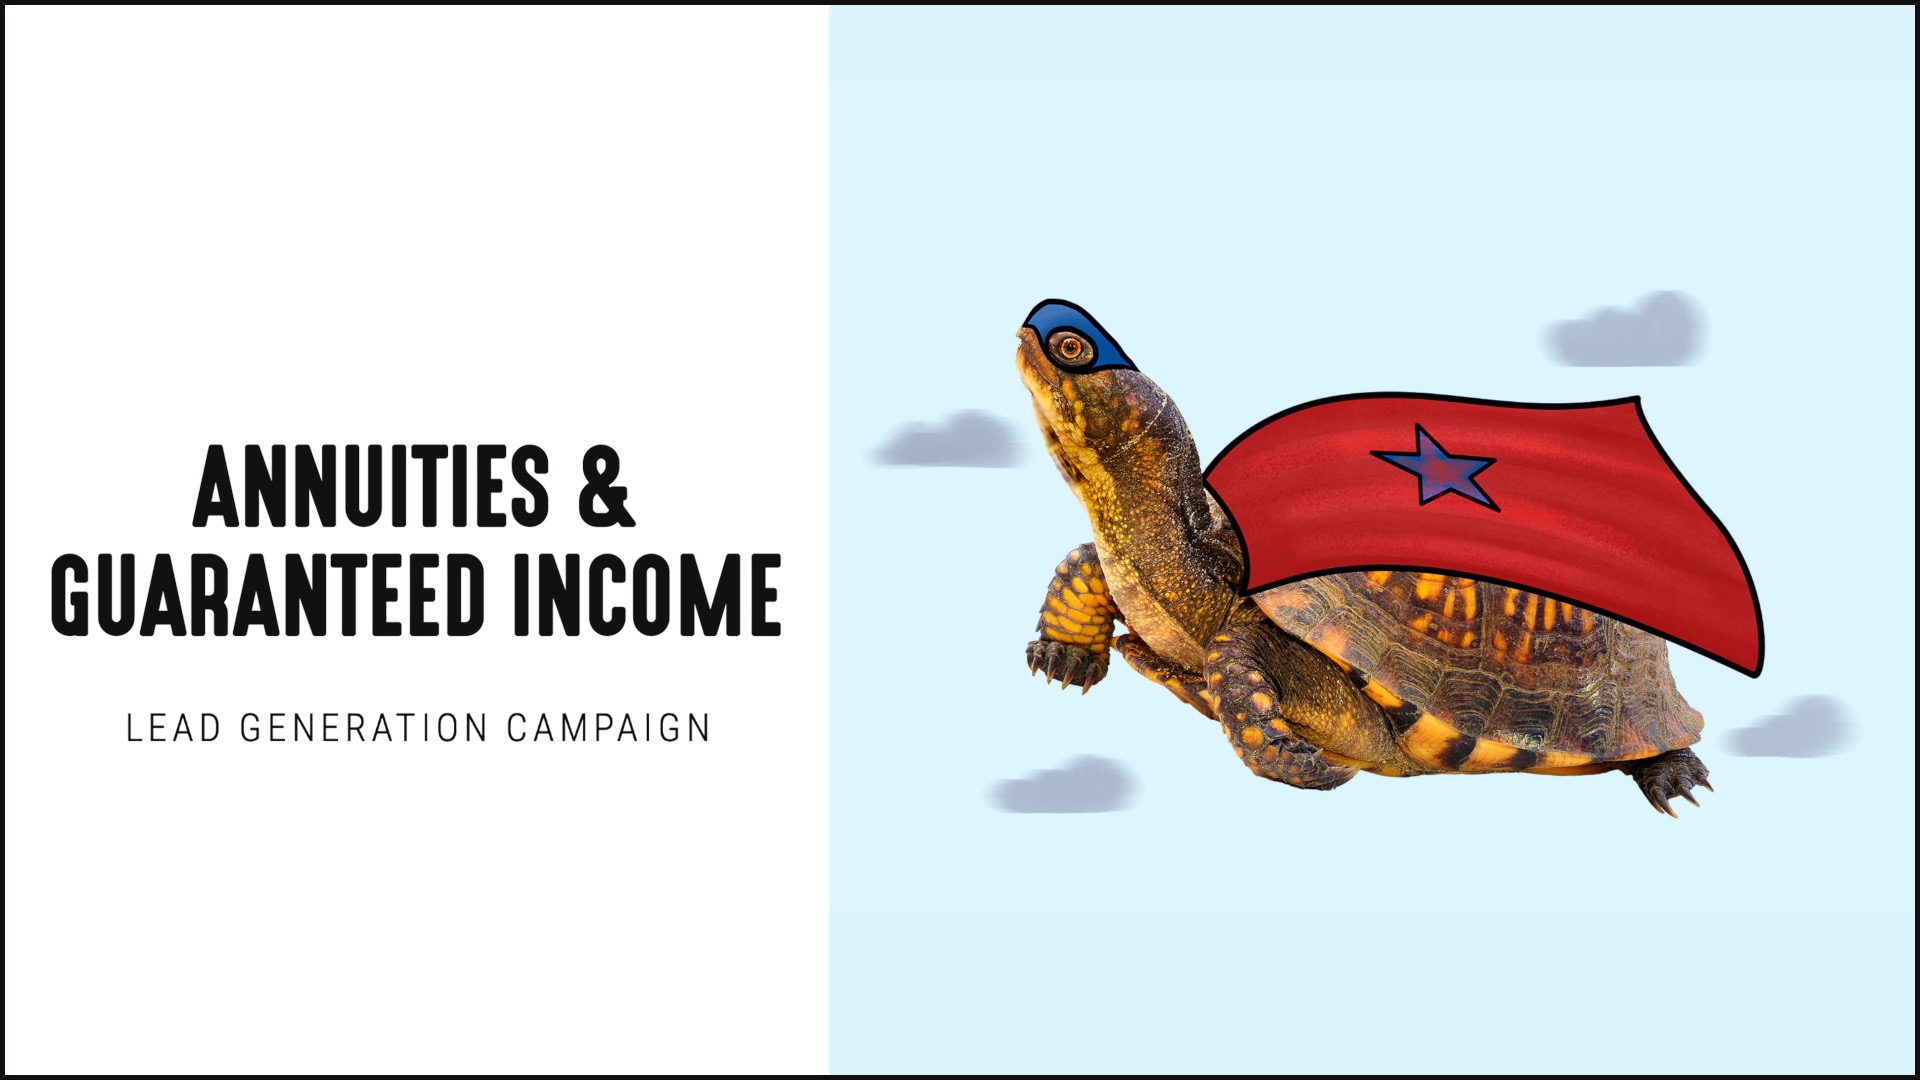 [NEW] Annuities and Guaranteed Income - Lead Generation Campaign for Financial Advisors